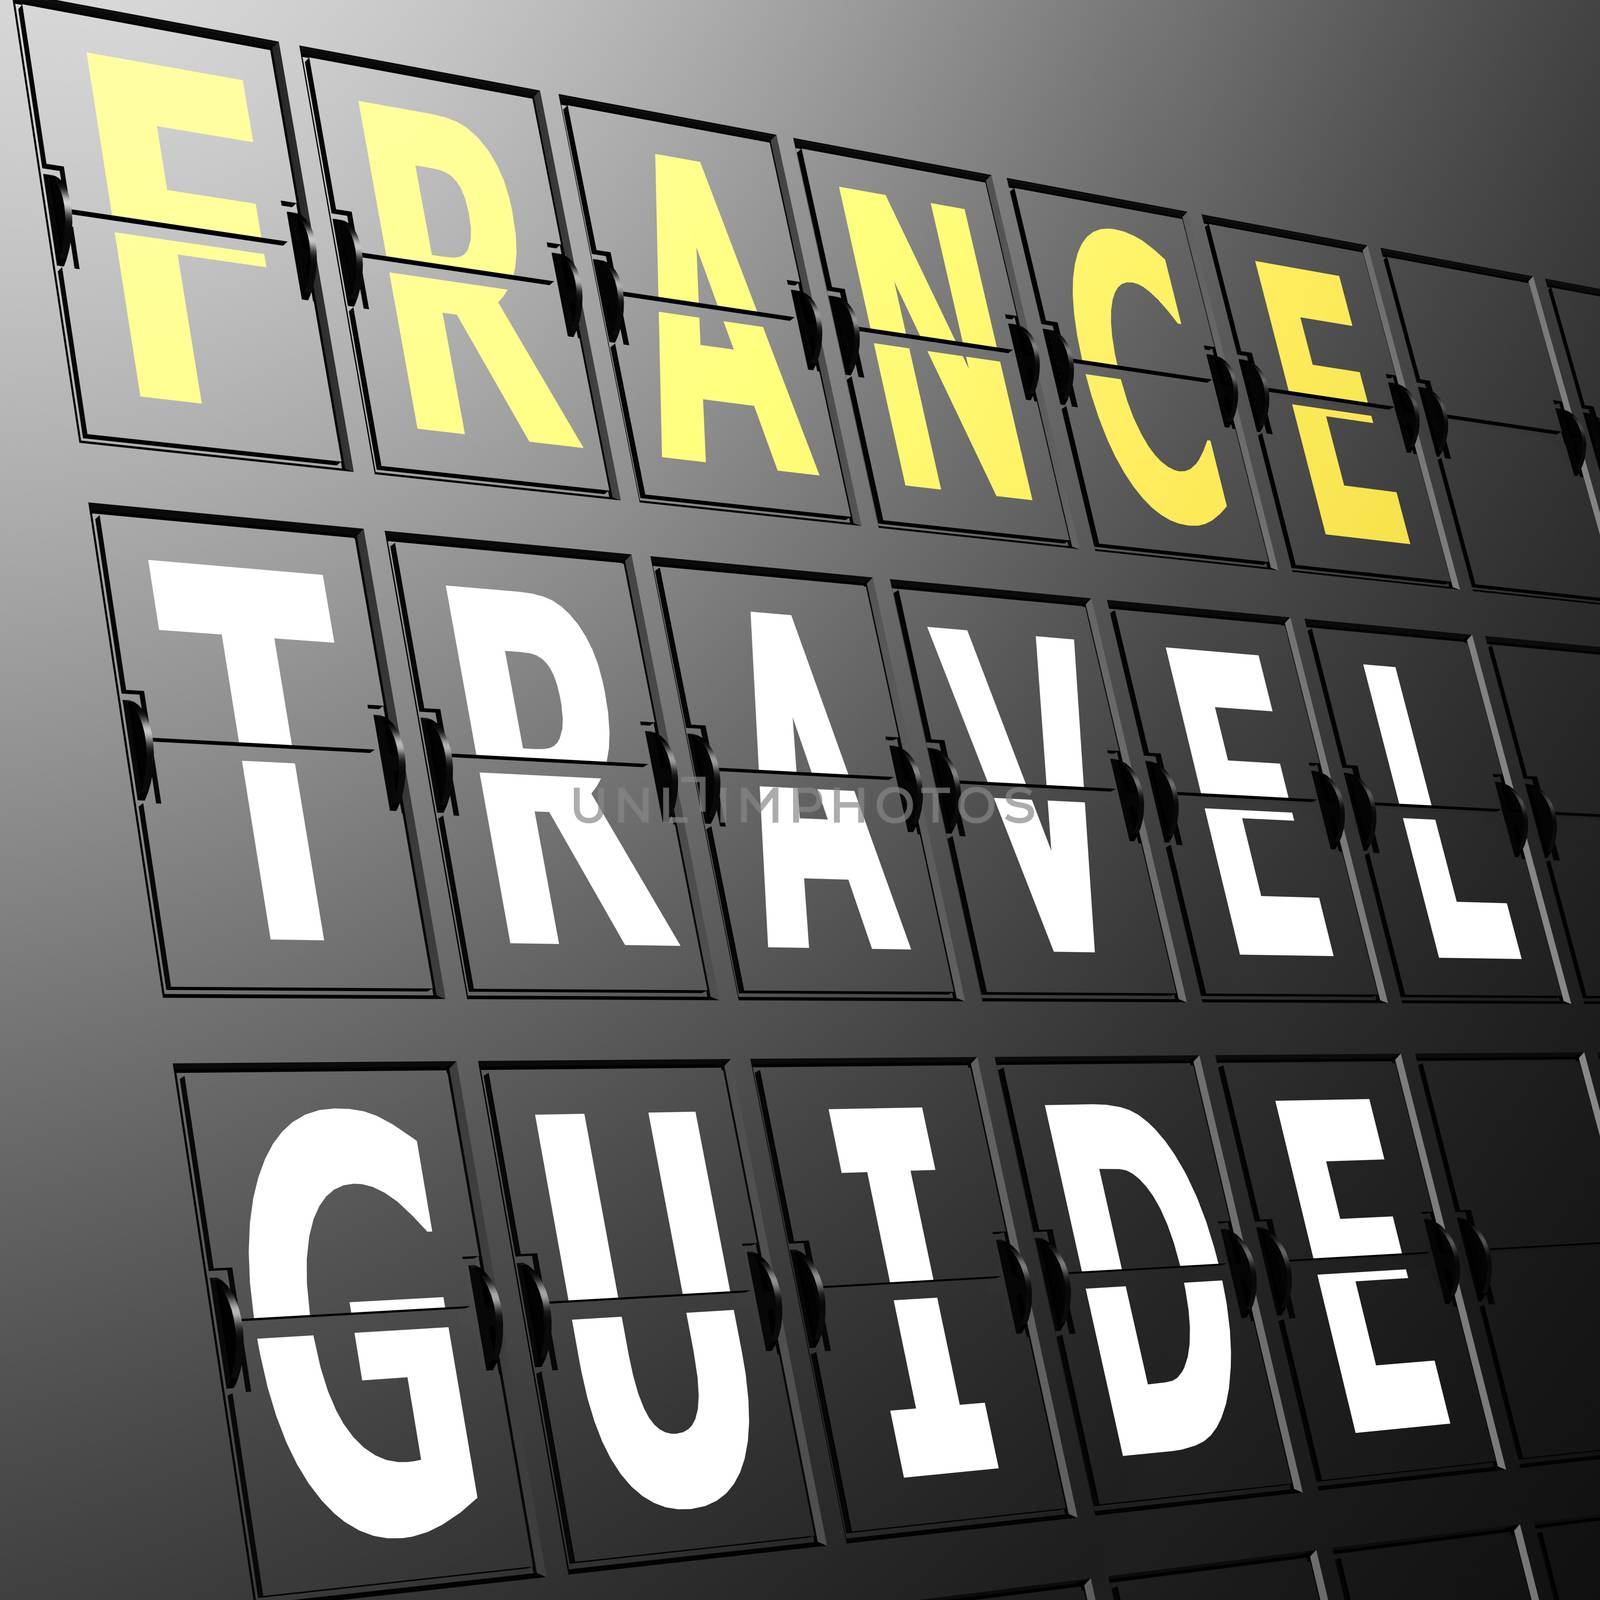 Airport display France travel guide by tang90246